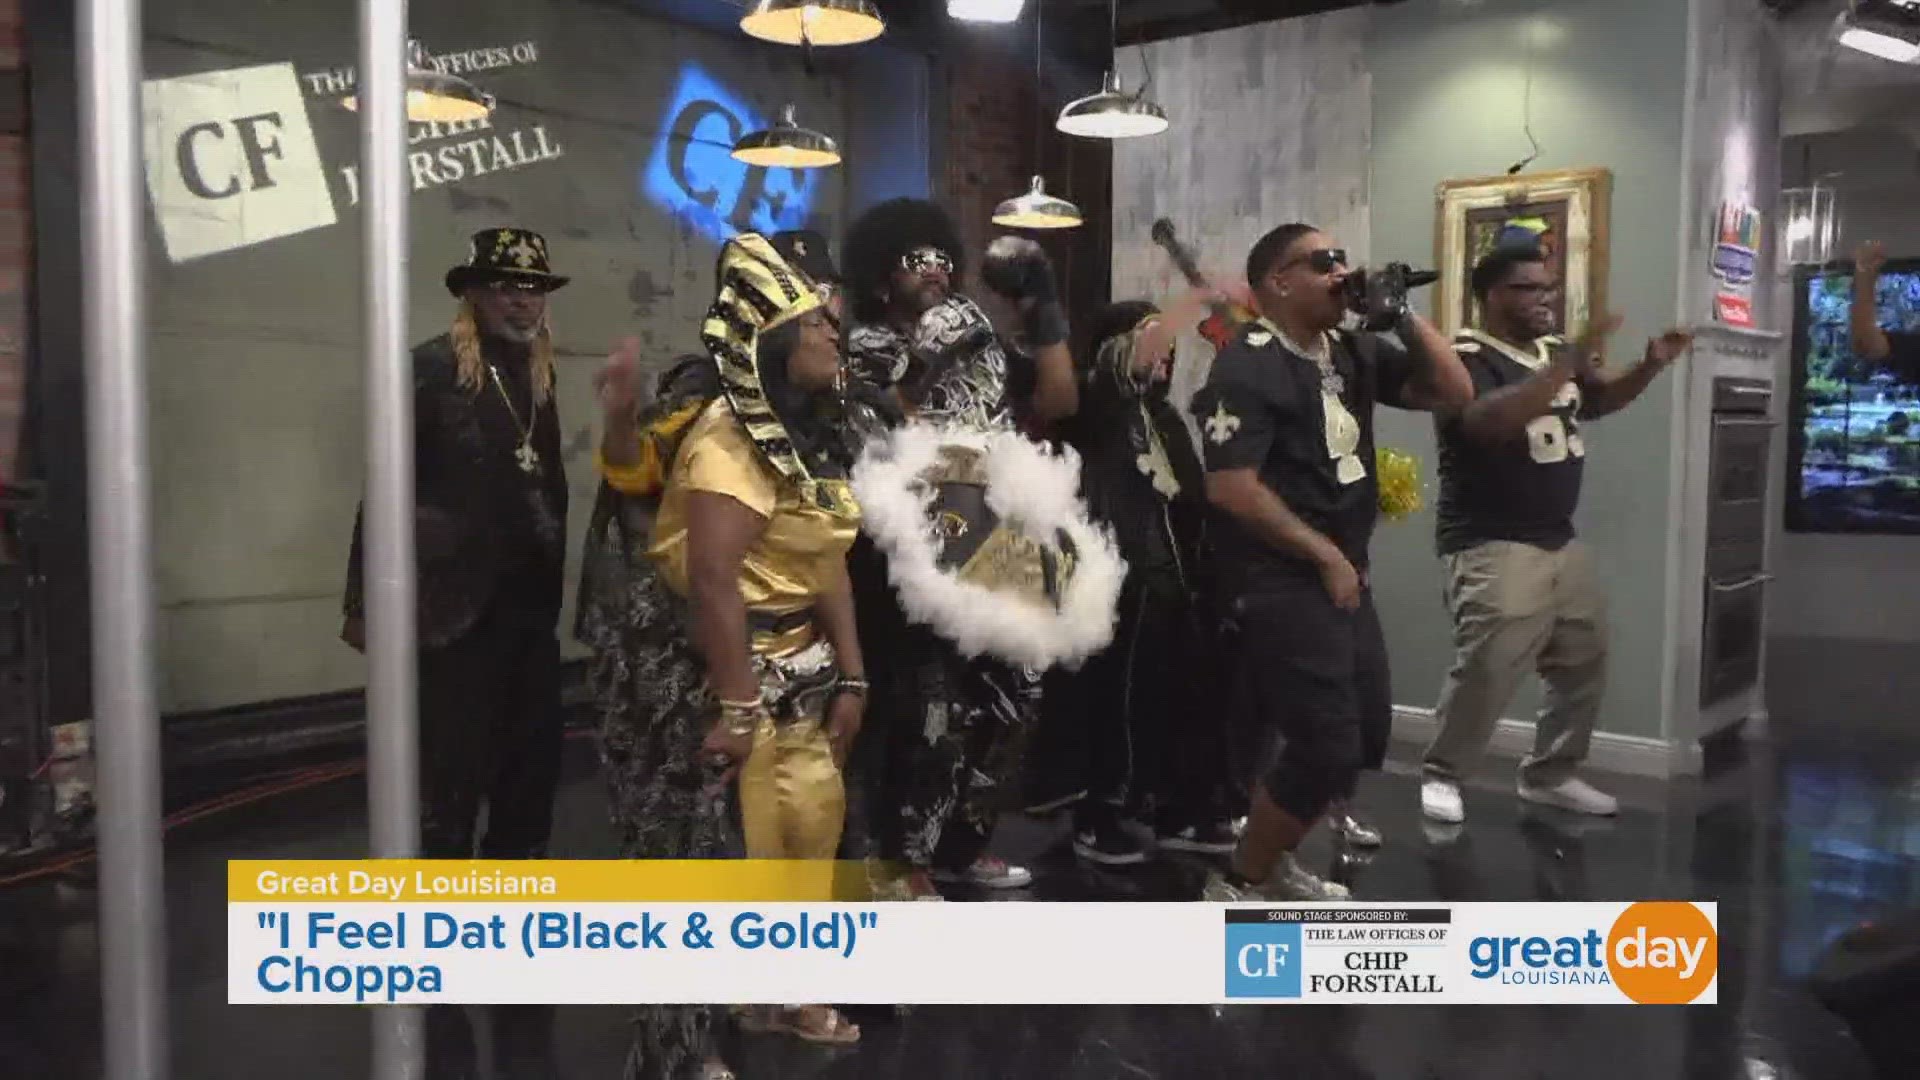 Choppa, DJ Spin & the Saints Super Fans stopped by to help us get our Saints tailgate party rocking!